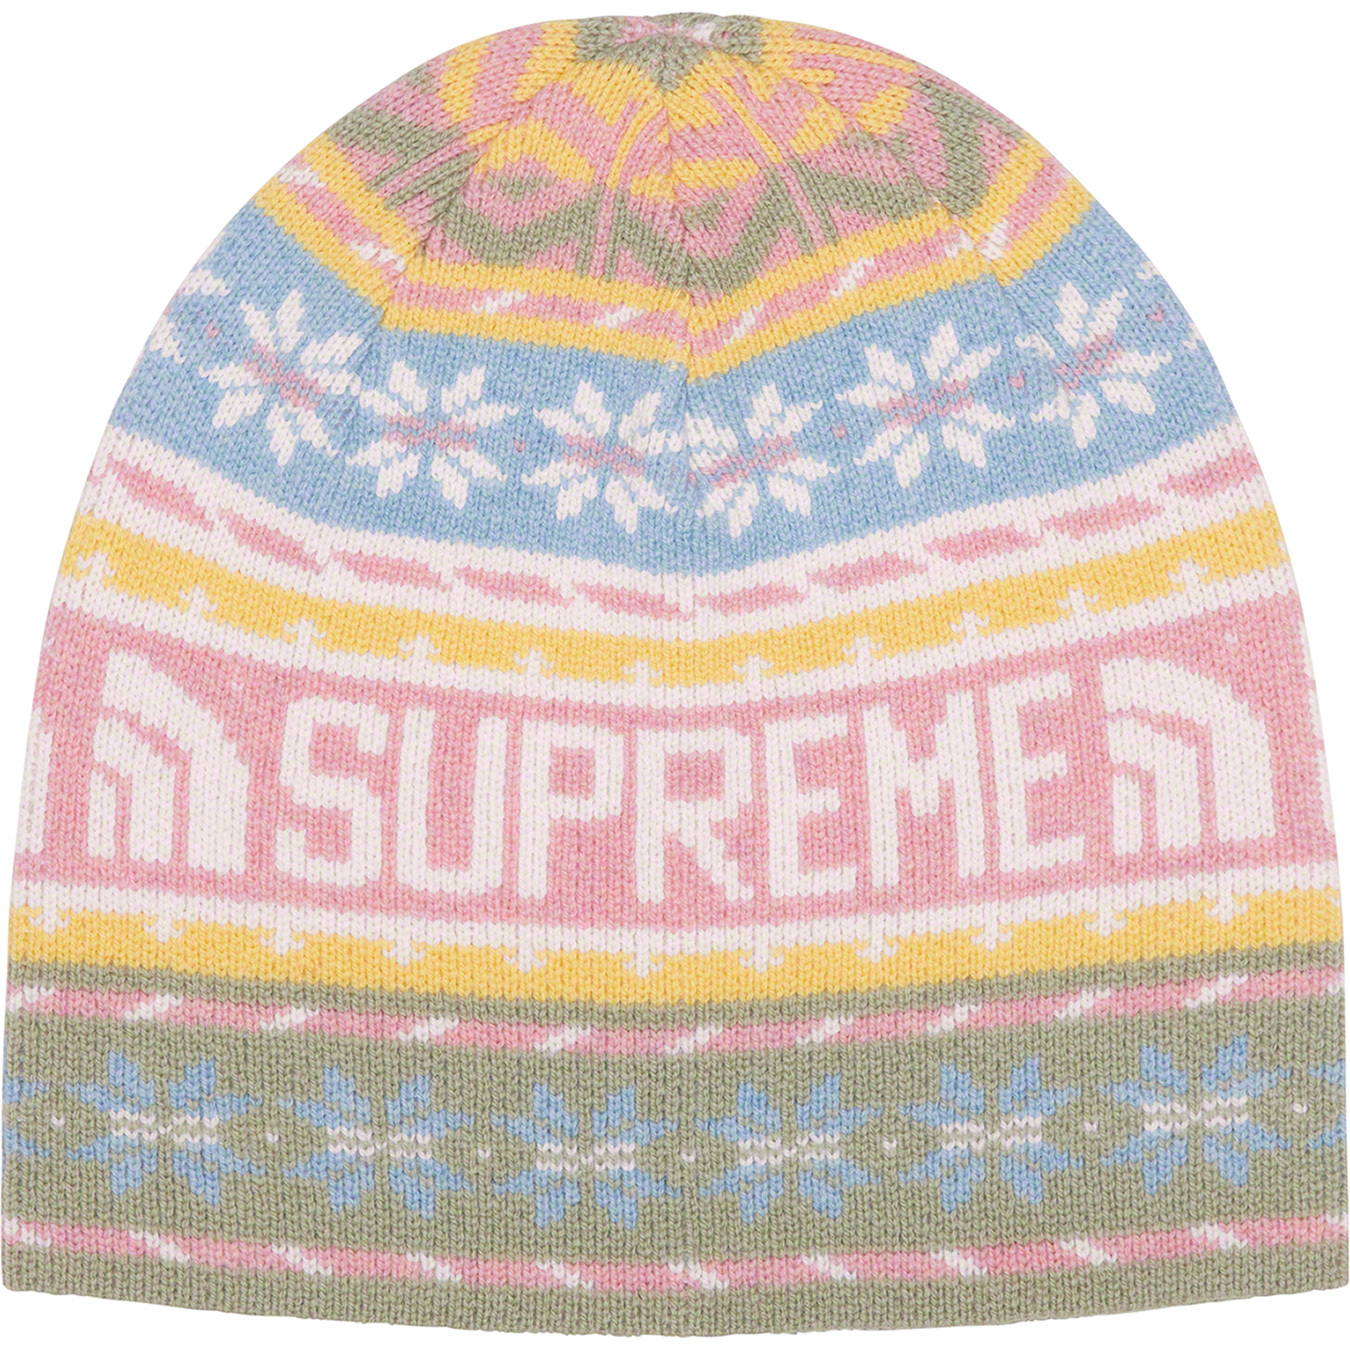 Supreme®/The North Face® Beanie